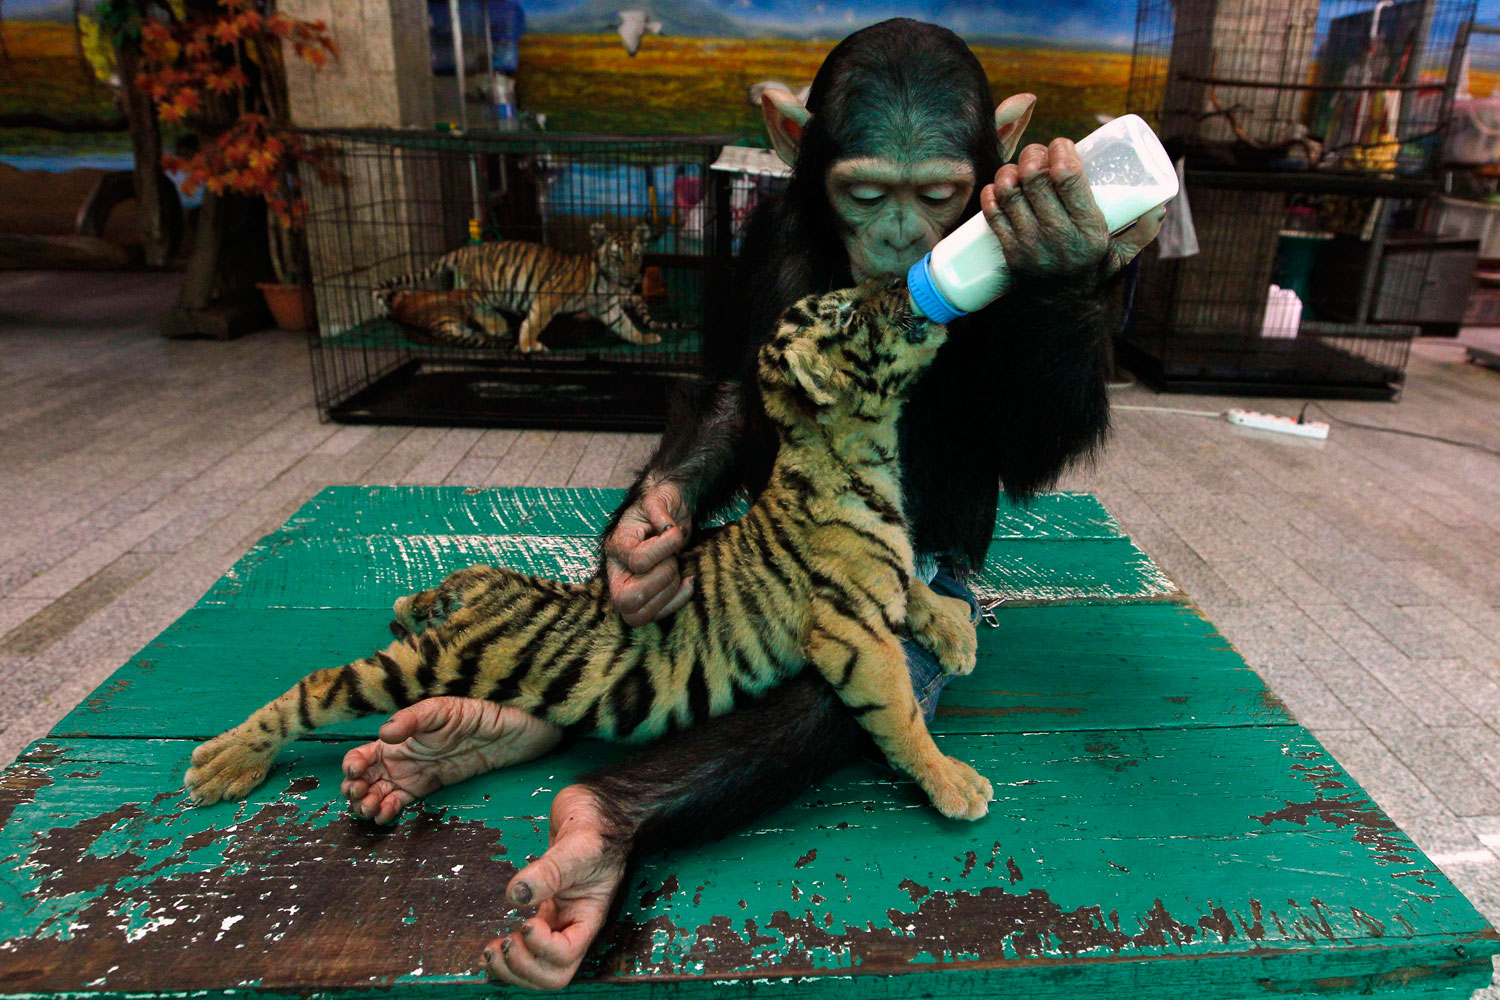 Two-year-old chimpanzee  Do Do  feeds milk to  Aorn , a 60-day-old tiger cub, at Samut Prakan Crocodile Farm and Zoo in Samut Prakan province on the outskirts of Bangkok, July 30, 2011. The crocodile farm, used as a tourist attraction, houses some 80,000 crocodiles and is the largest in Thailand.